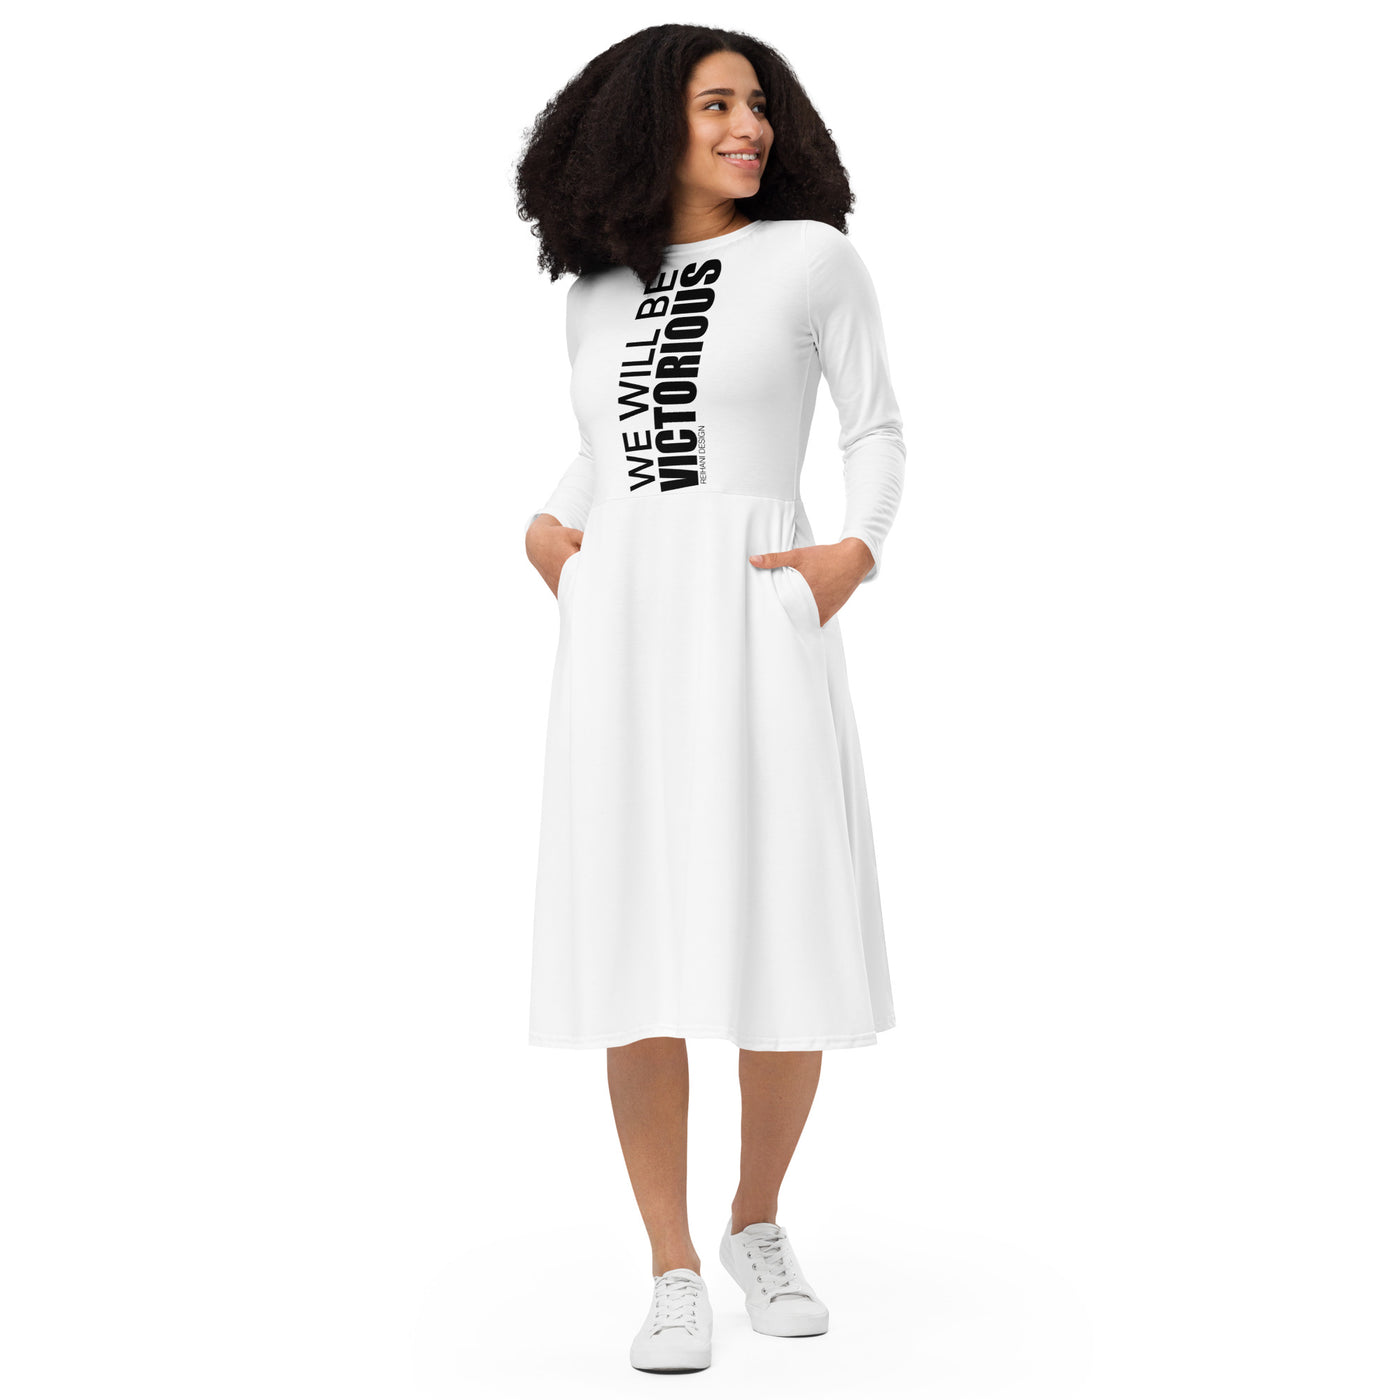 All-over print long sleeve midi dress with We will be victorious imprint